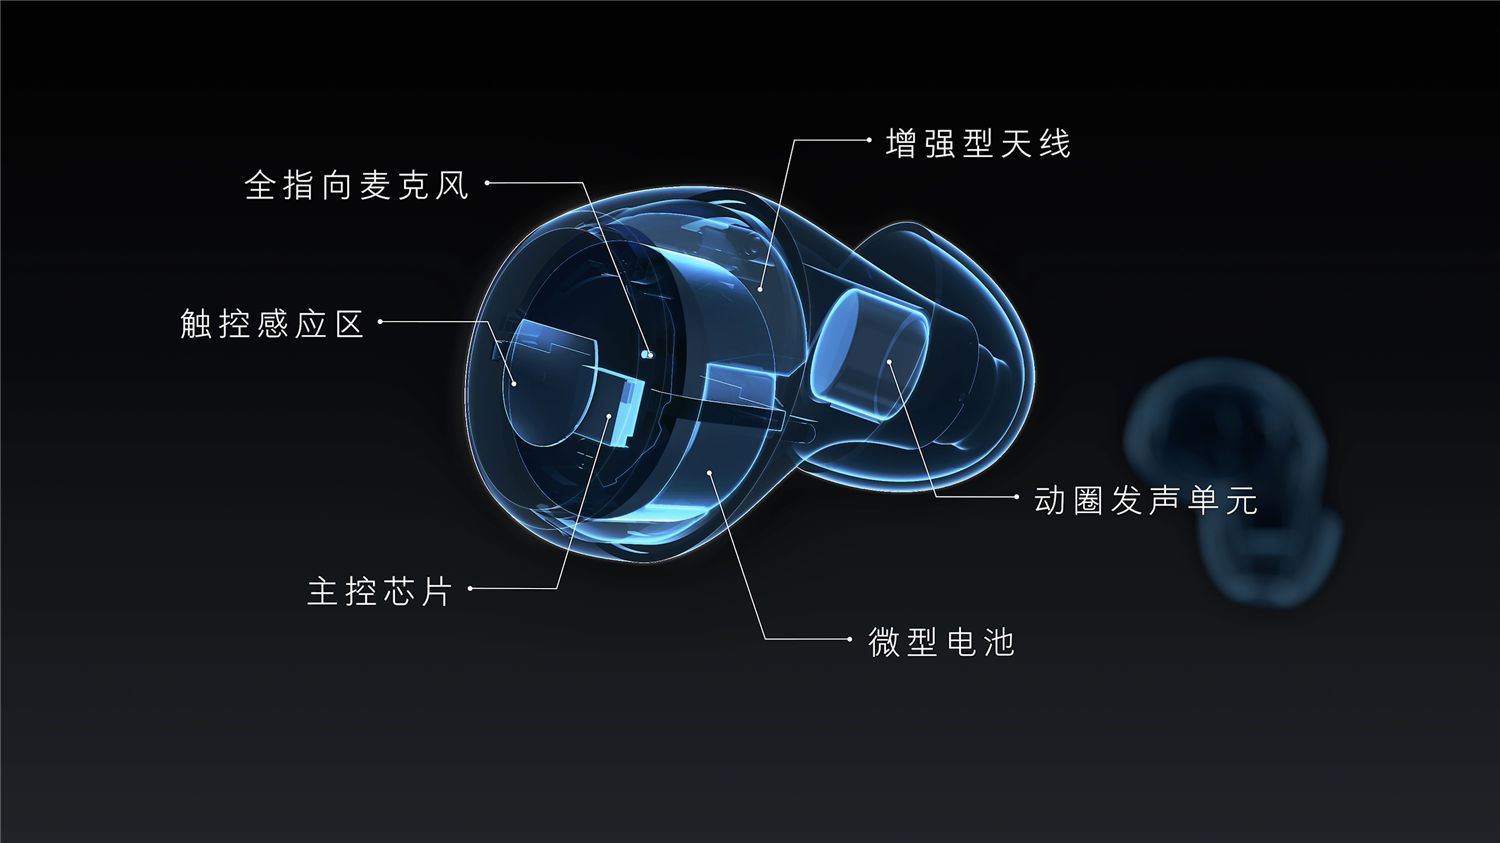 Meizu Launches POP Wireless Earbuds and Halo Laser Earphones - Gizmochina